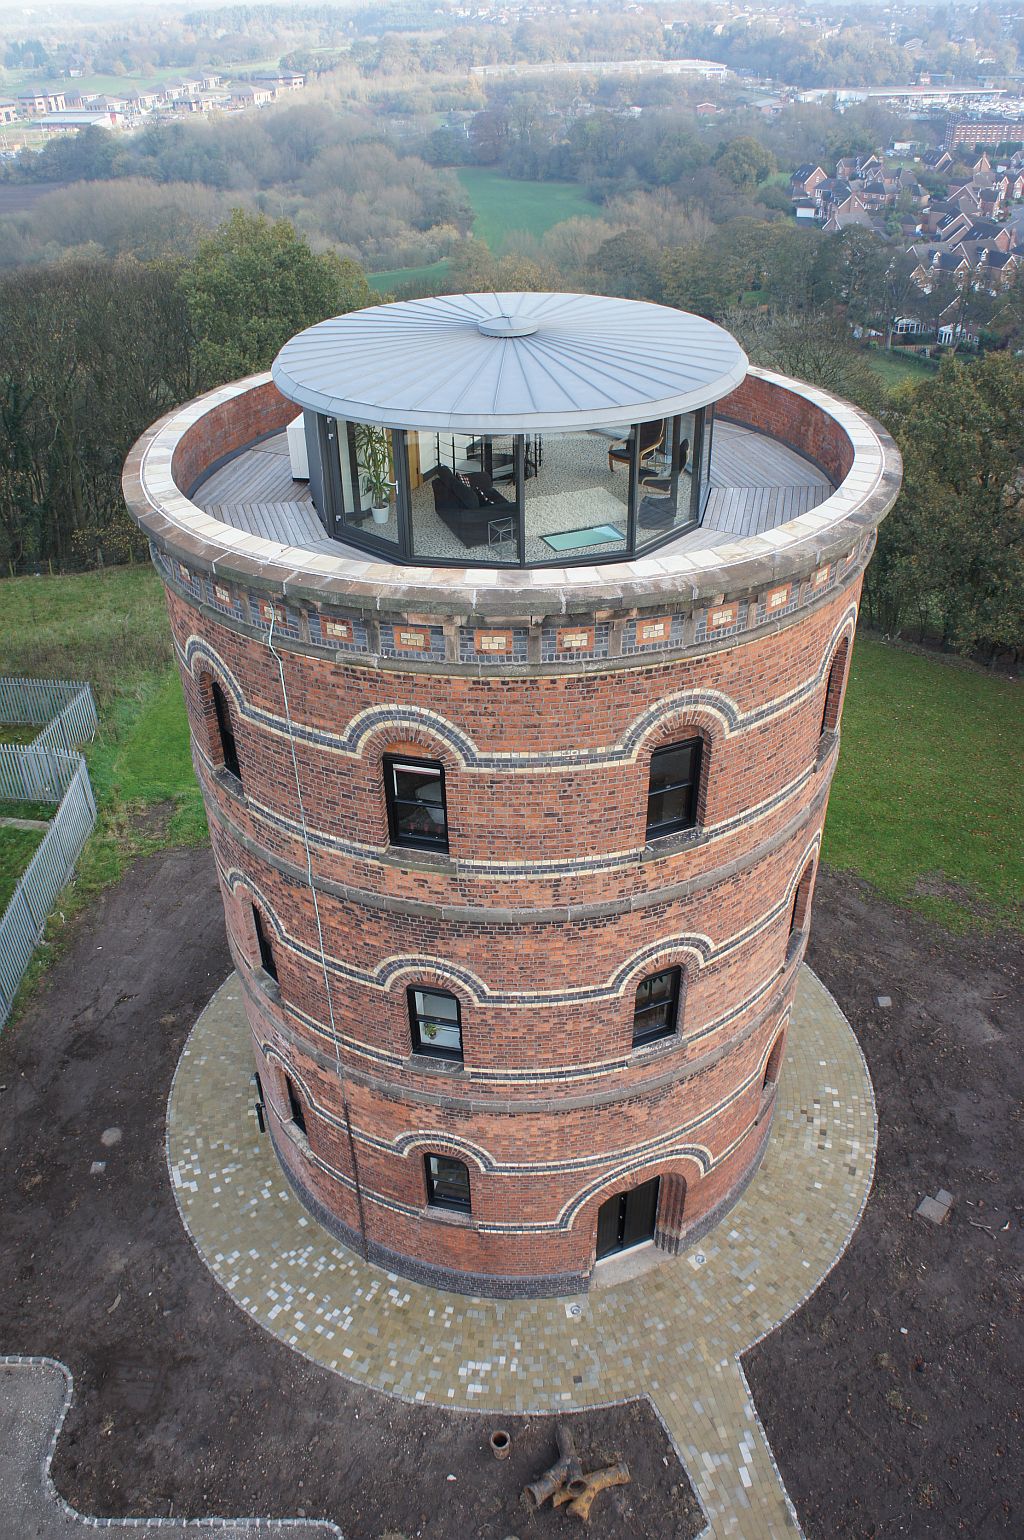  Andy Critchlow water tower on Restoration Man